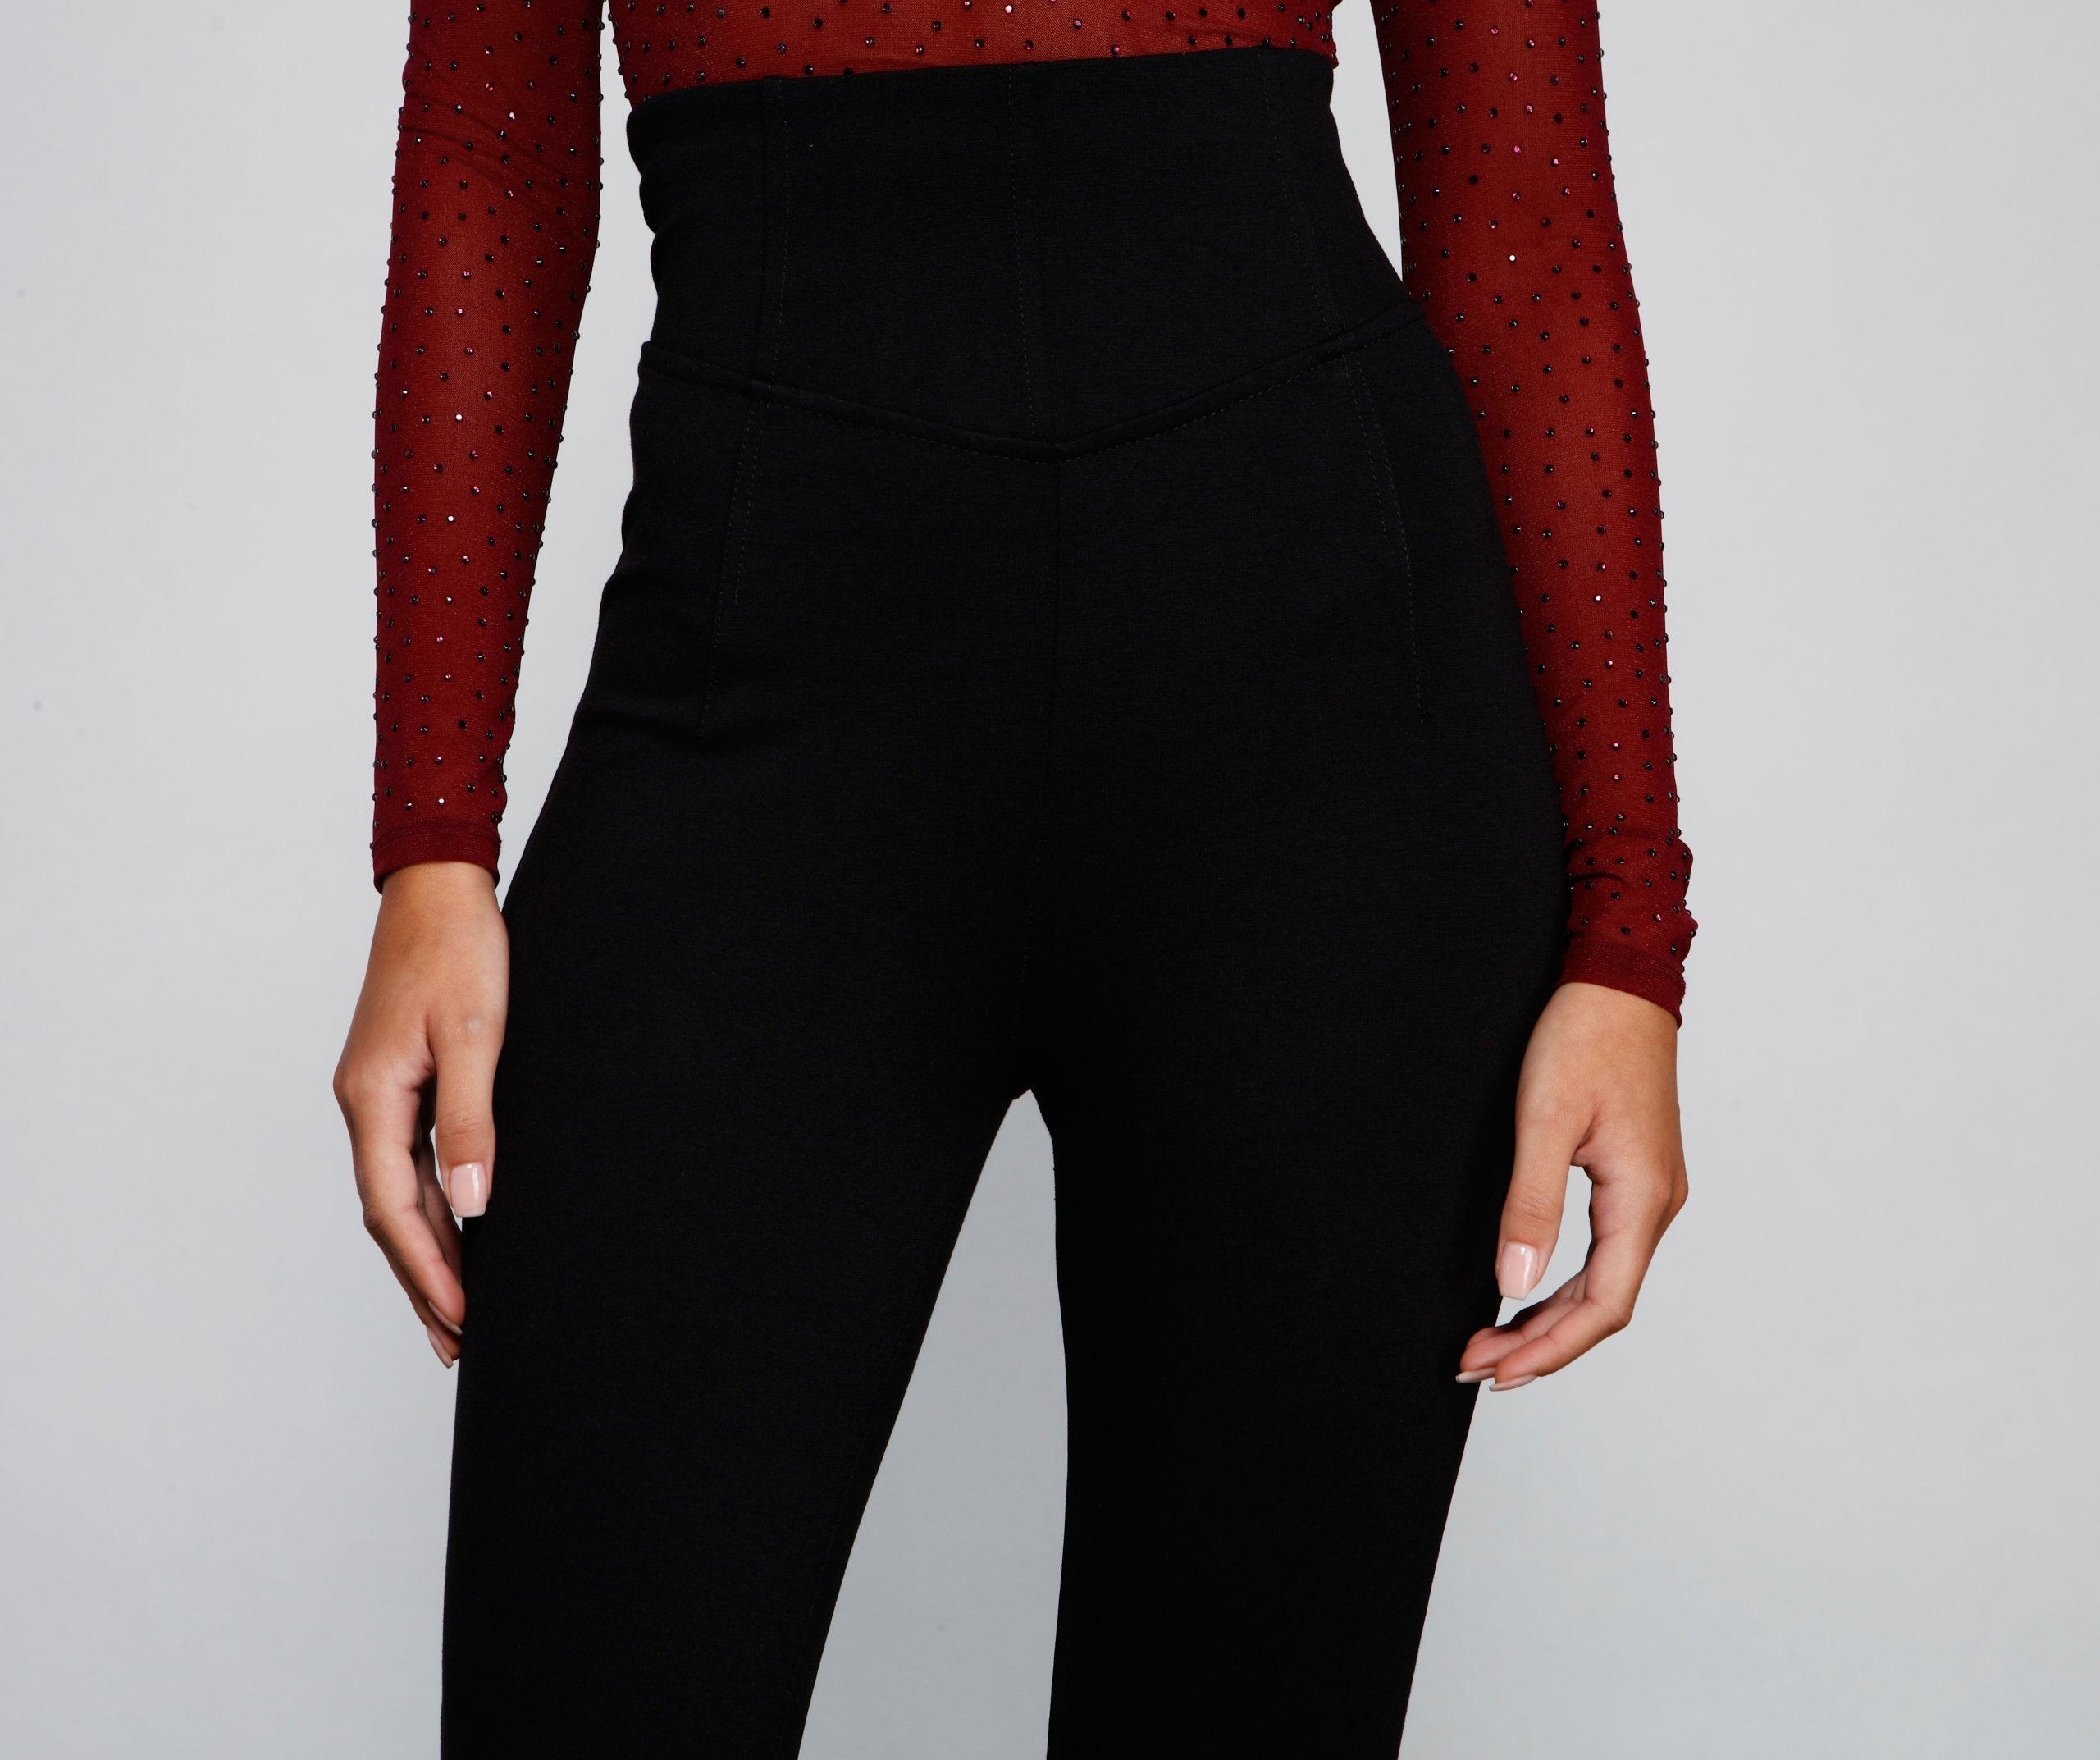 Classic High Waist Ponte Knit Leggings - Lady Occasions